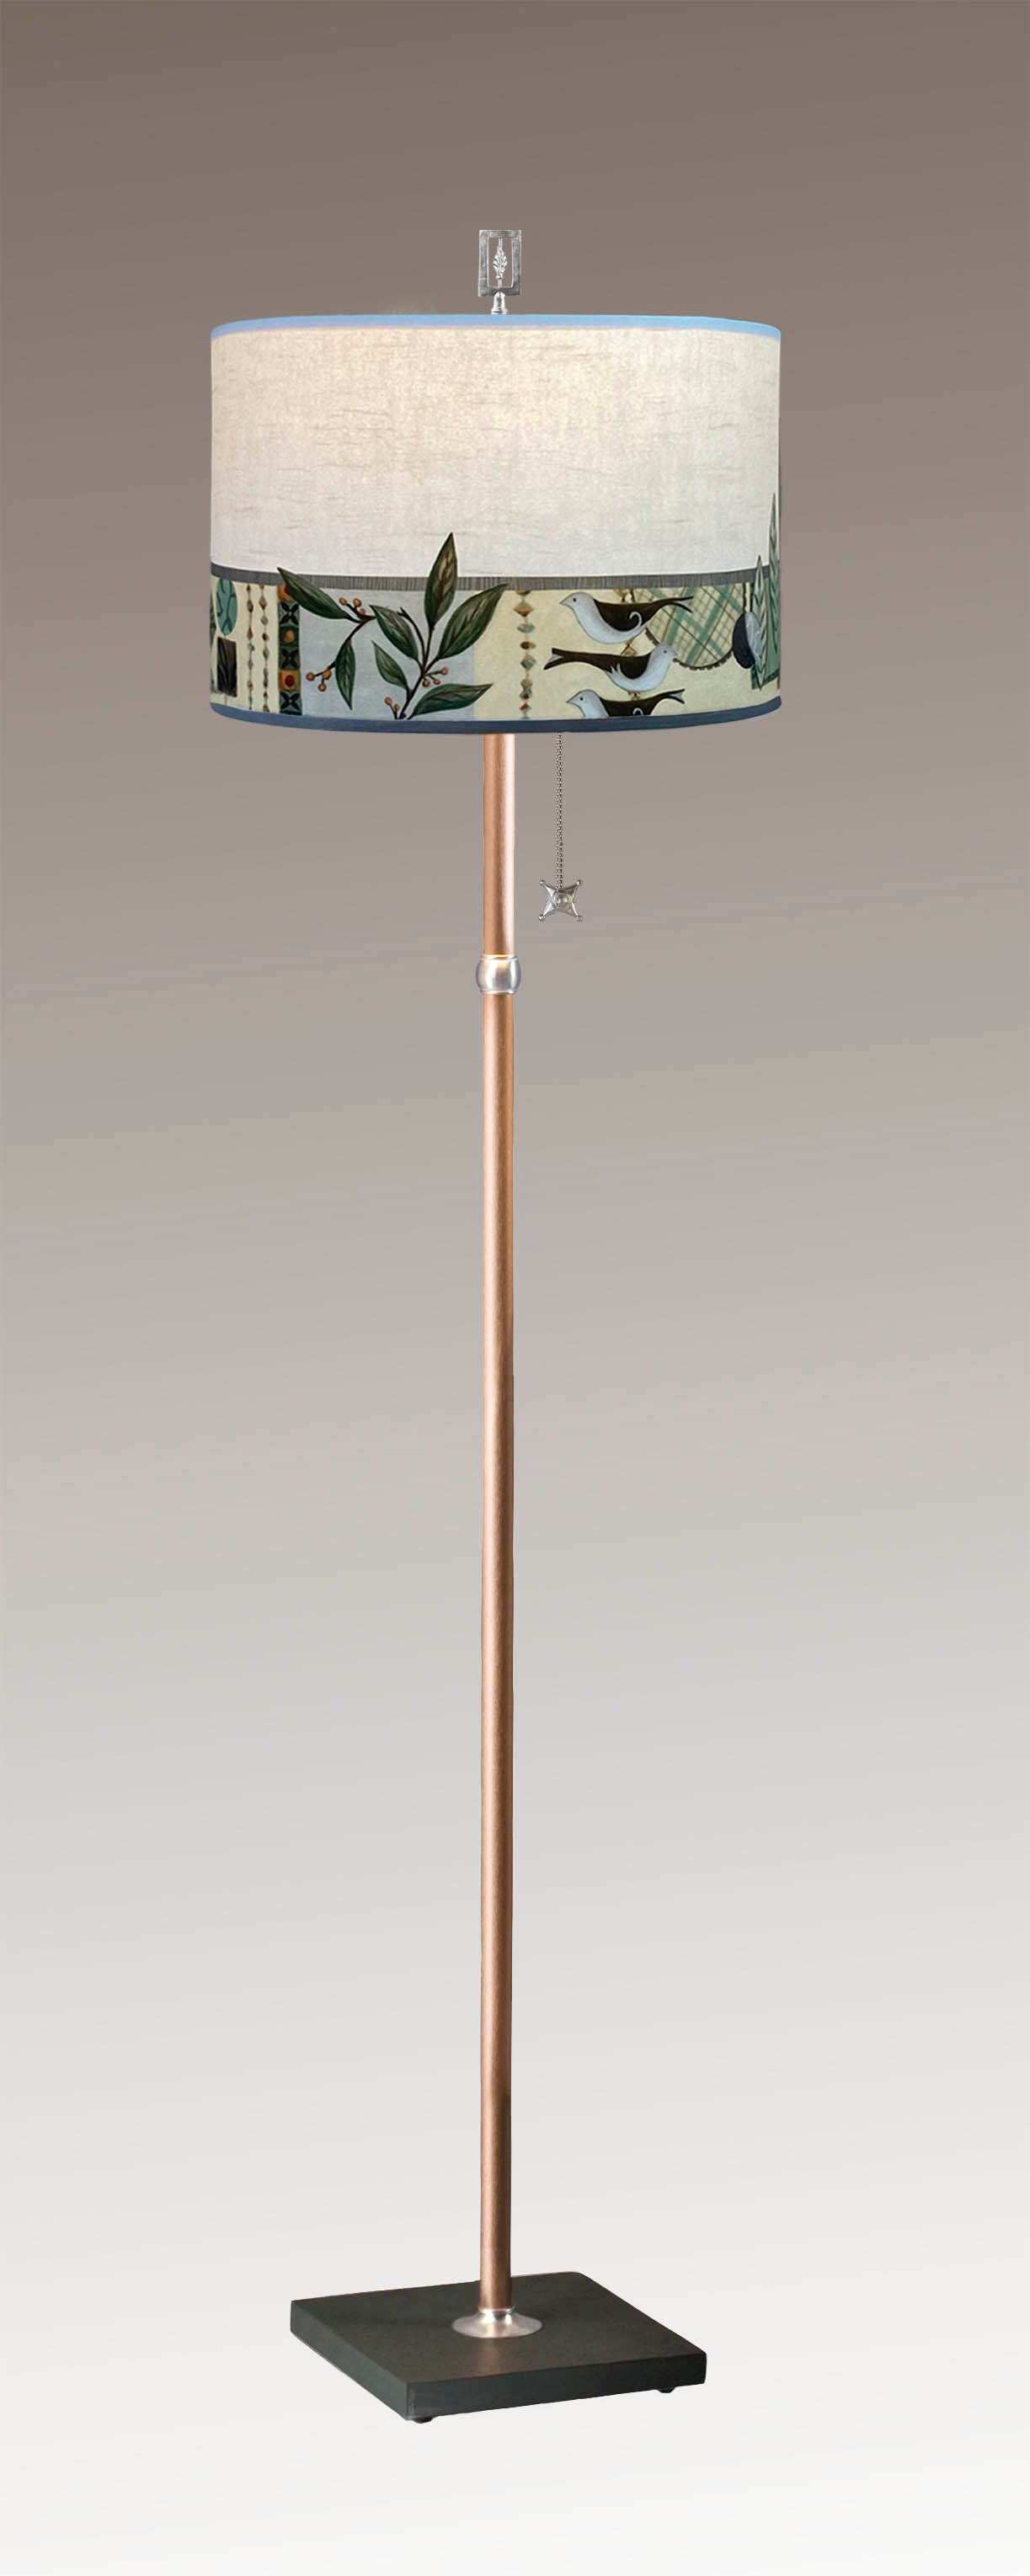 Janna Ugone & Co Floor Lamp Copper Floor Lamp with Large Drum Shade in New Capri Opal